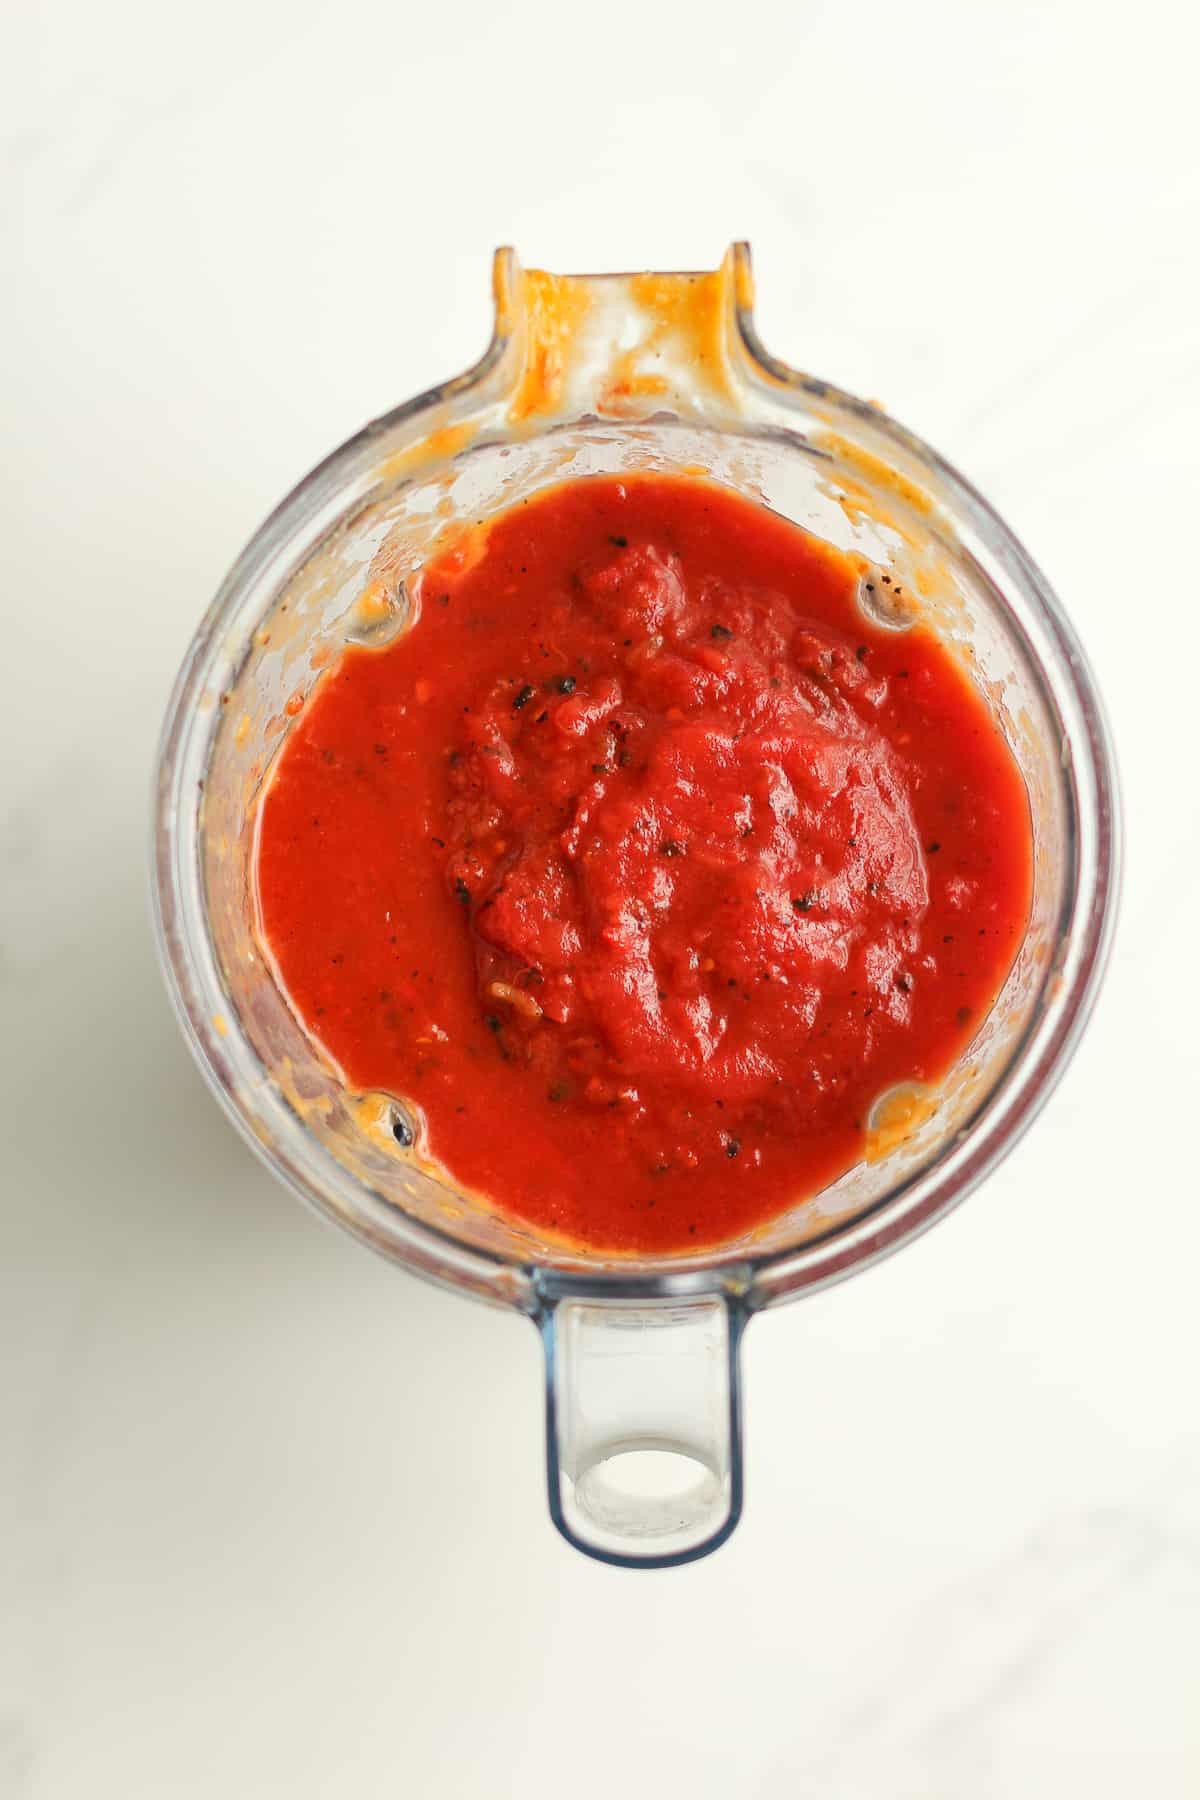 The tomato mixture in the blender.